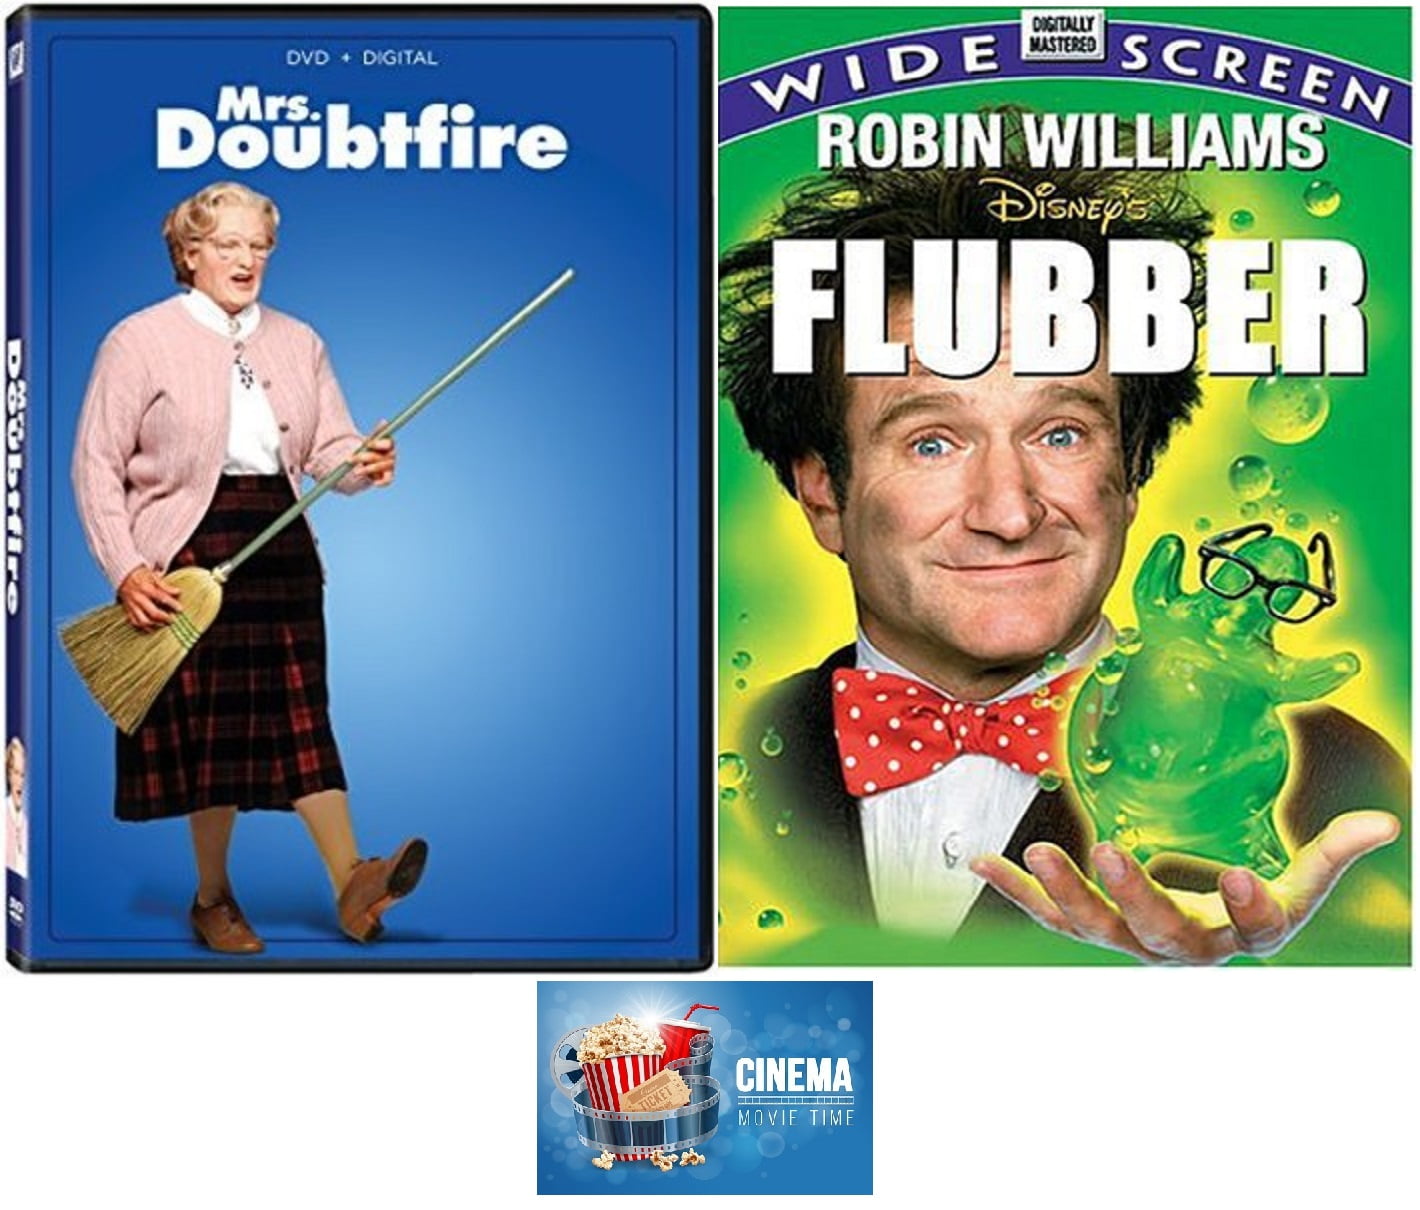 Robin Williams Comedy Double Feature Flubber & Mrs. Doubtfire 2 DVD Set  Includes Cinema Movie Time Glossy Print Art Card 